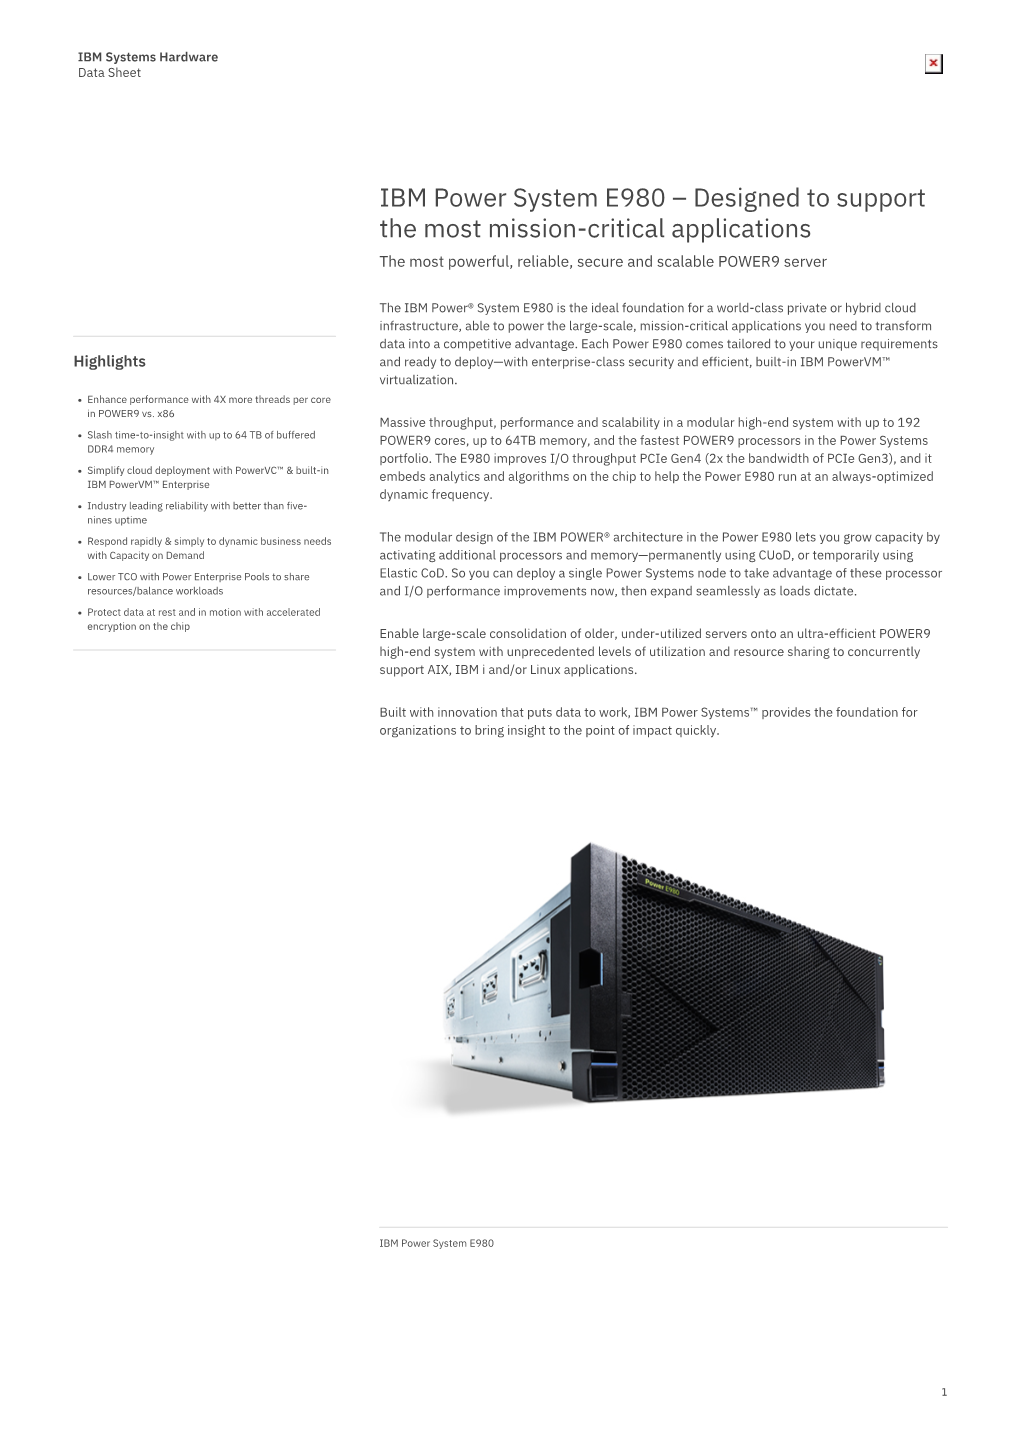 IBM Power System E980 – Designed to Support the Most Mission-Critical Applications the Most Powerful, Reliable, Secure and Scalable POWER9 Server